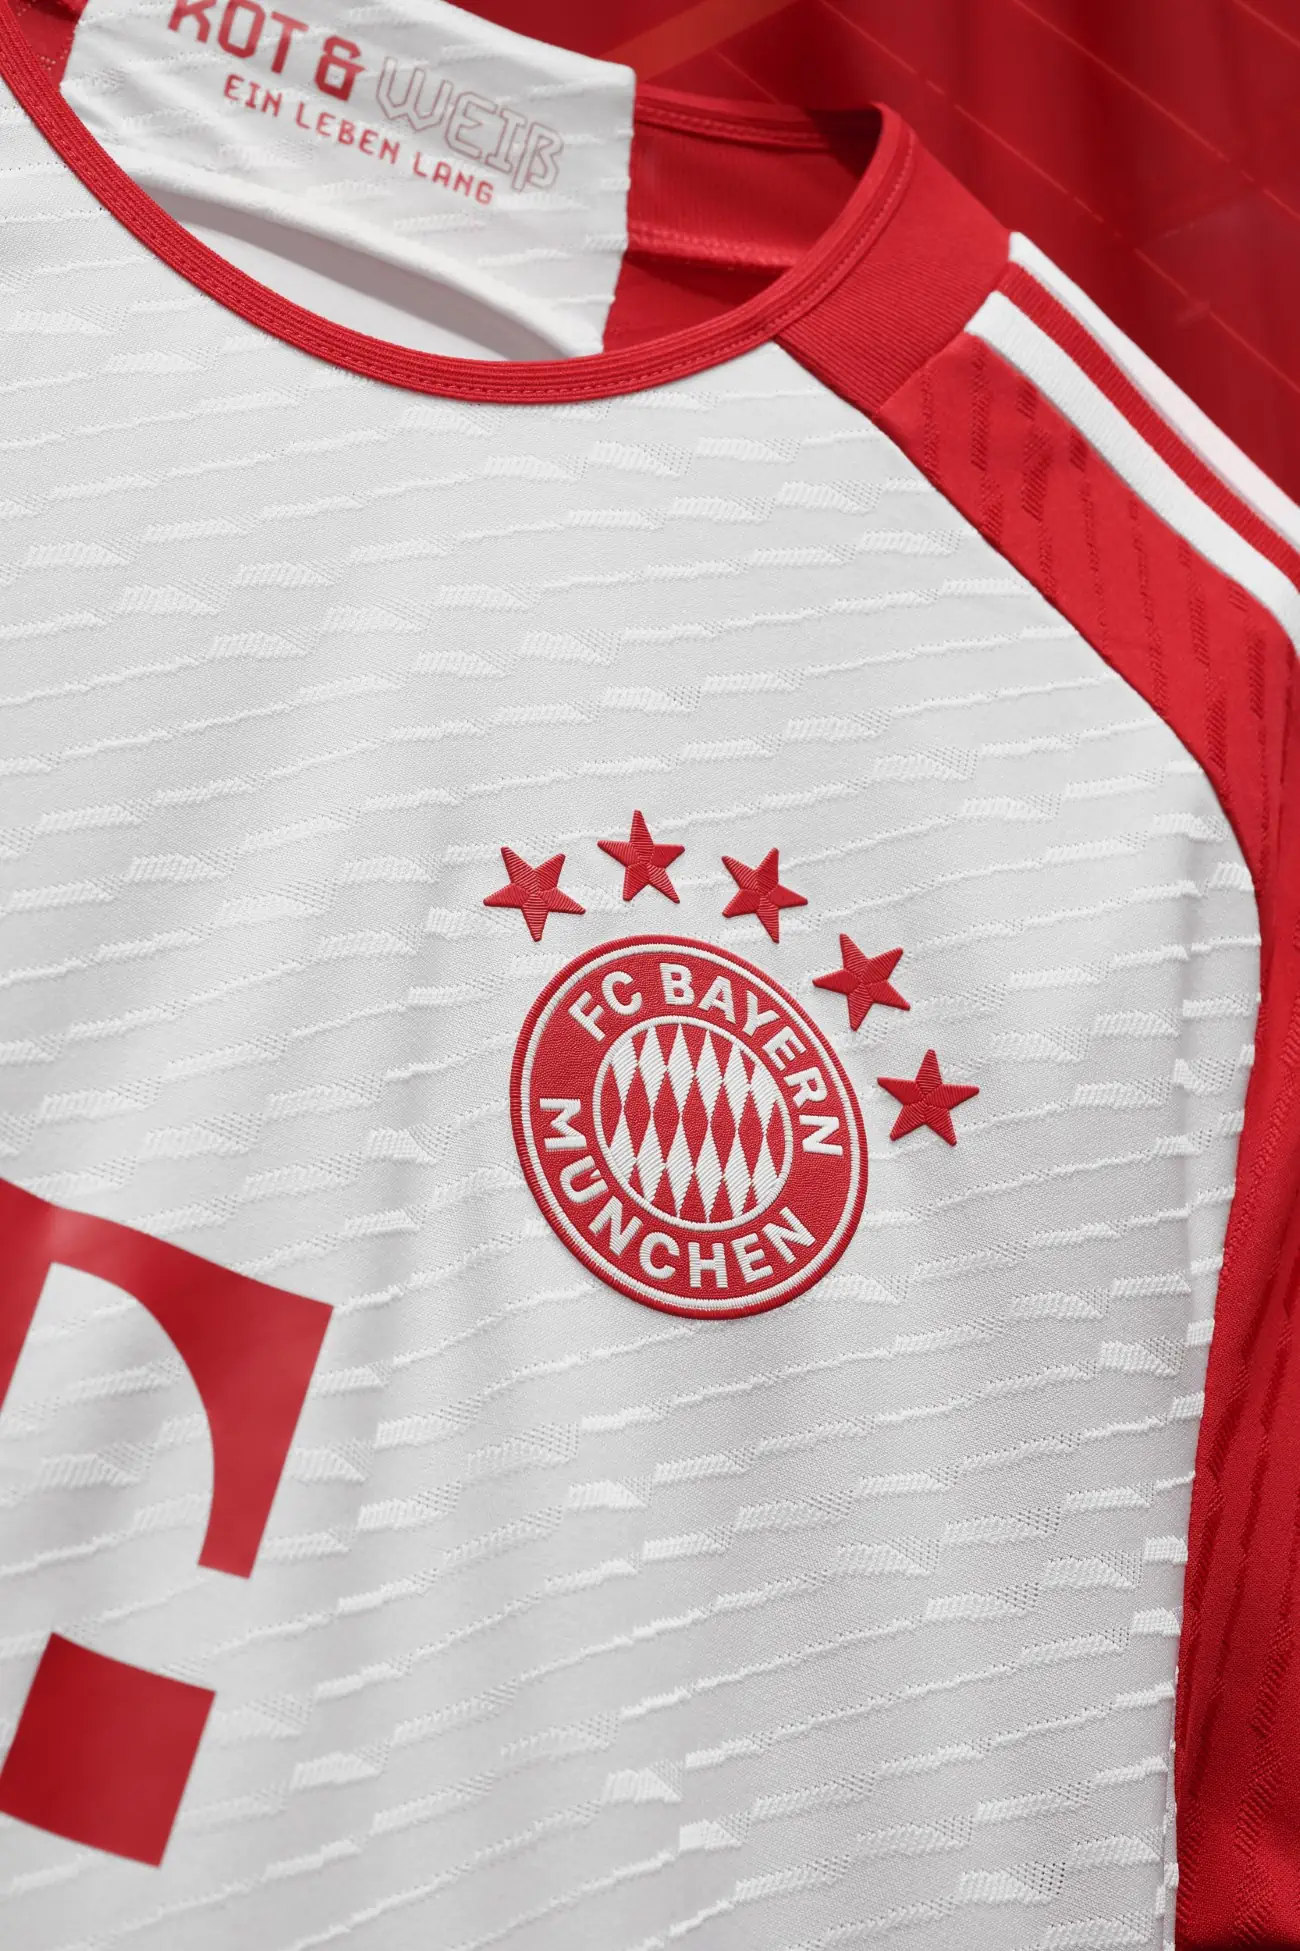 adidas x FC Bayern München, an ode to iconic red and white in the 2023-24 home jersey